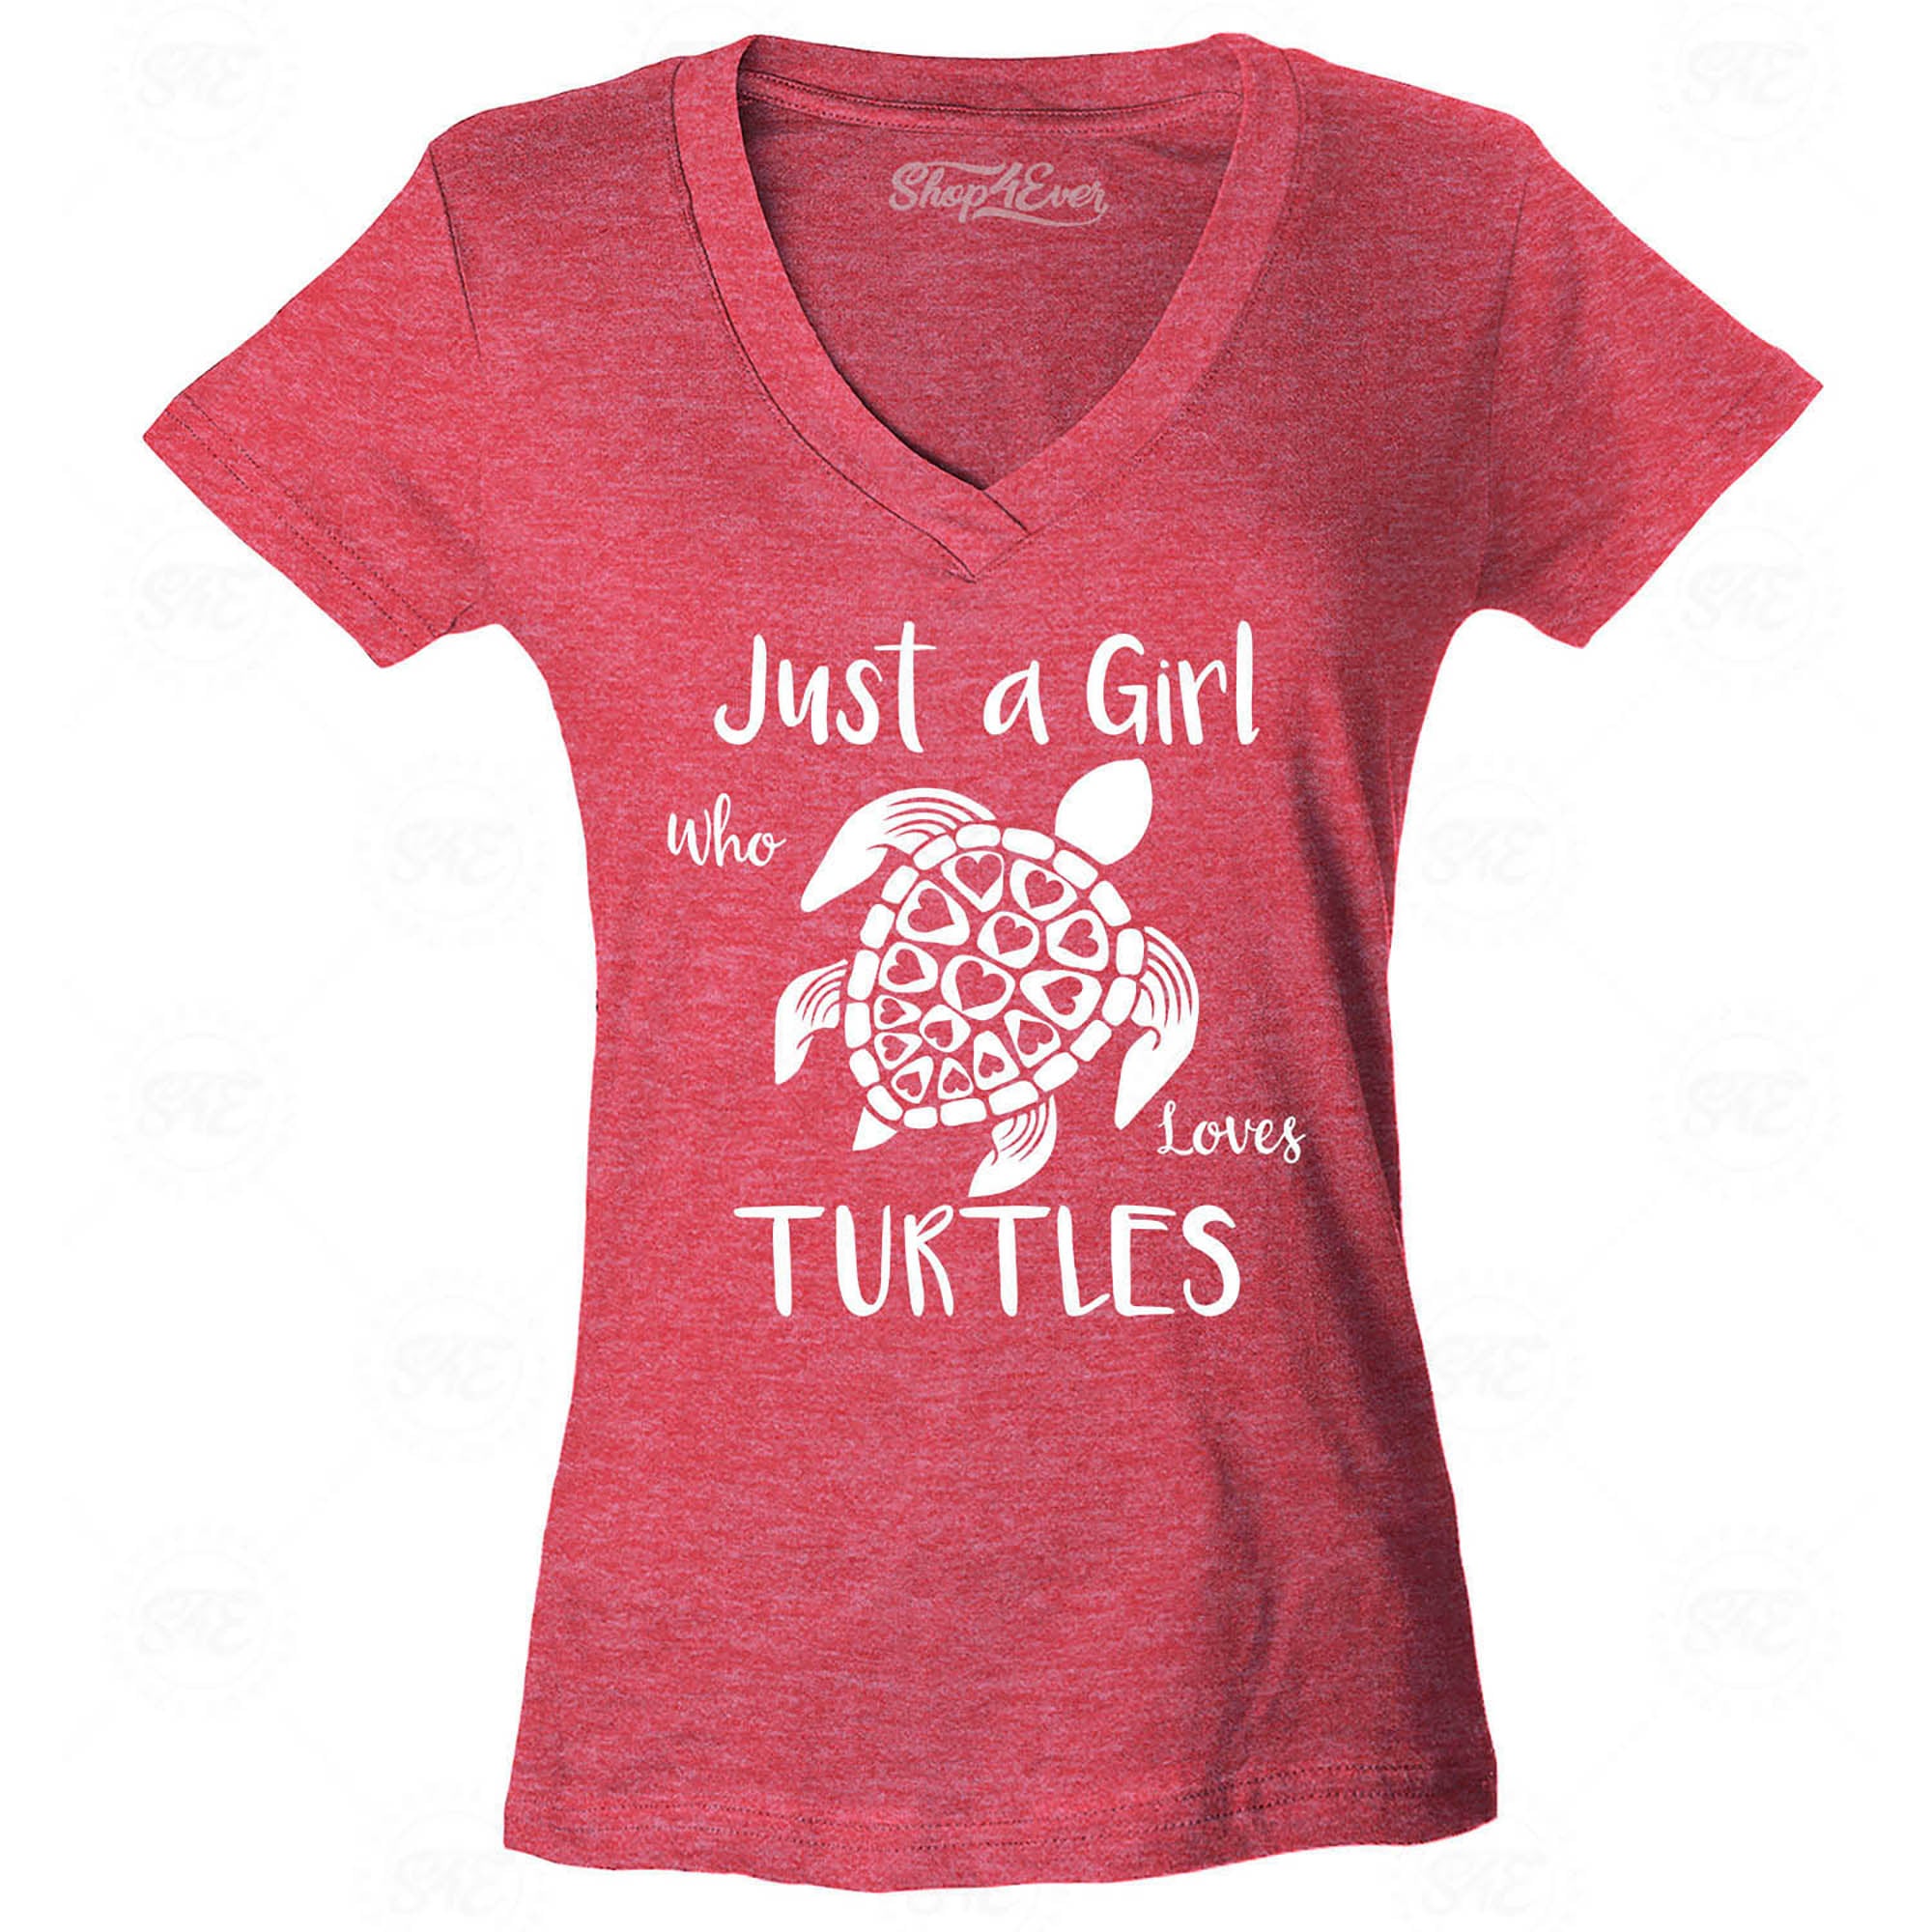 Just A Girl Who Loves Turtles Women's V-Neck T-Shirt Slim Fit